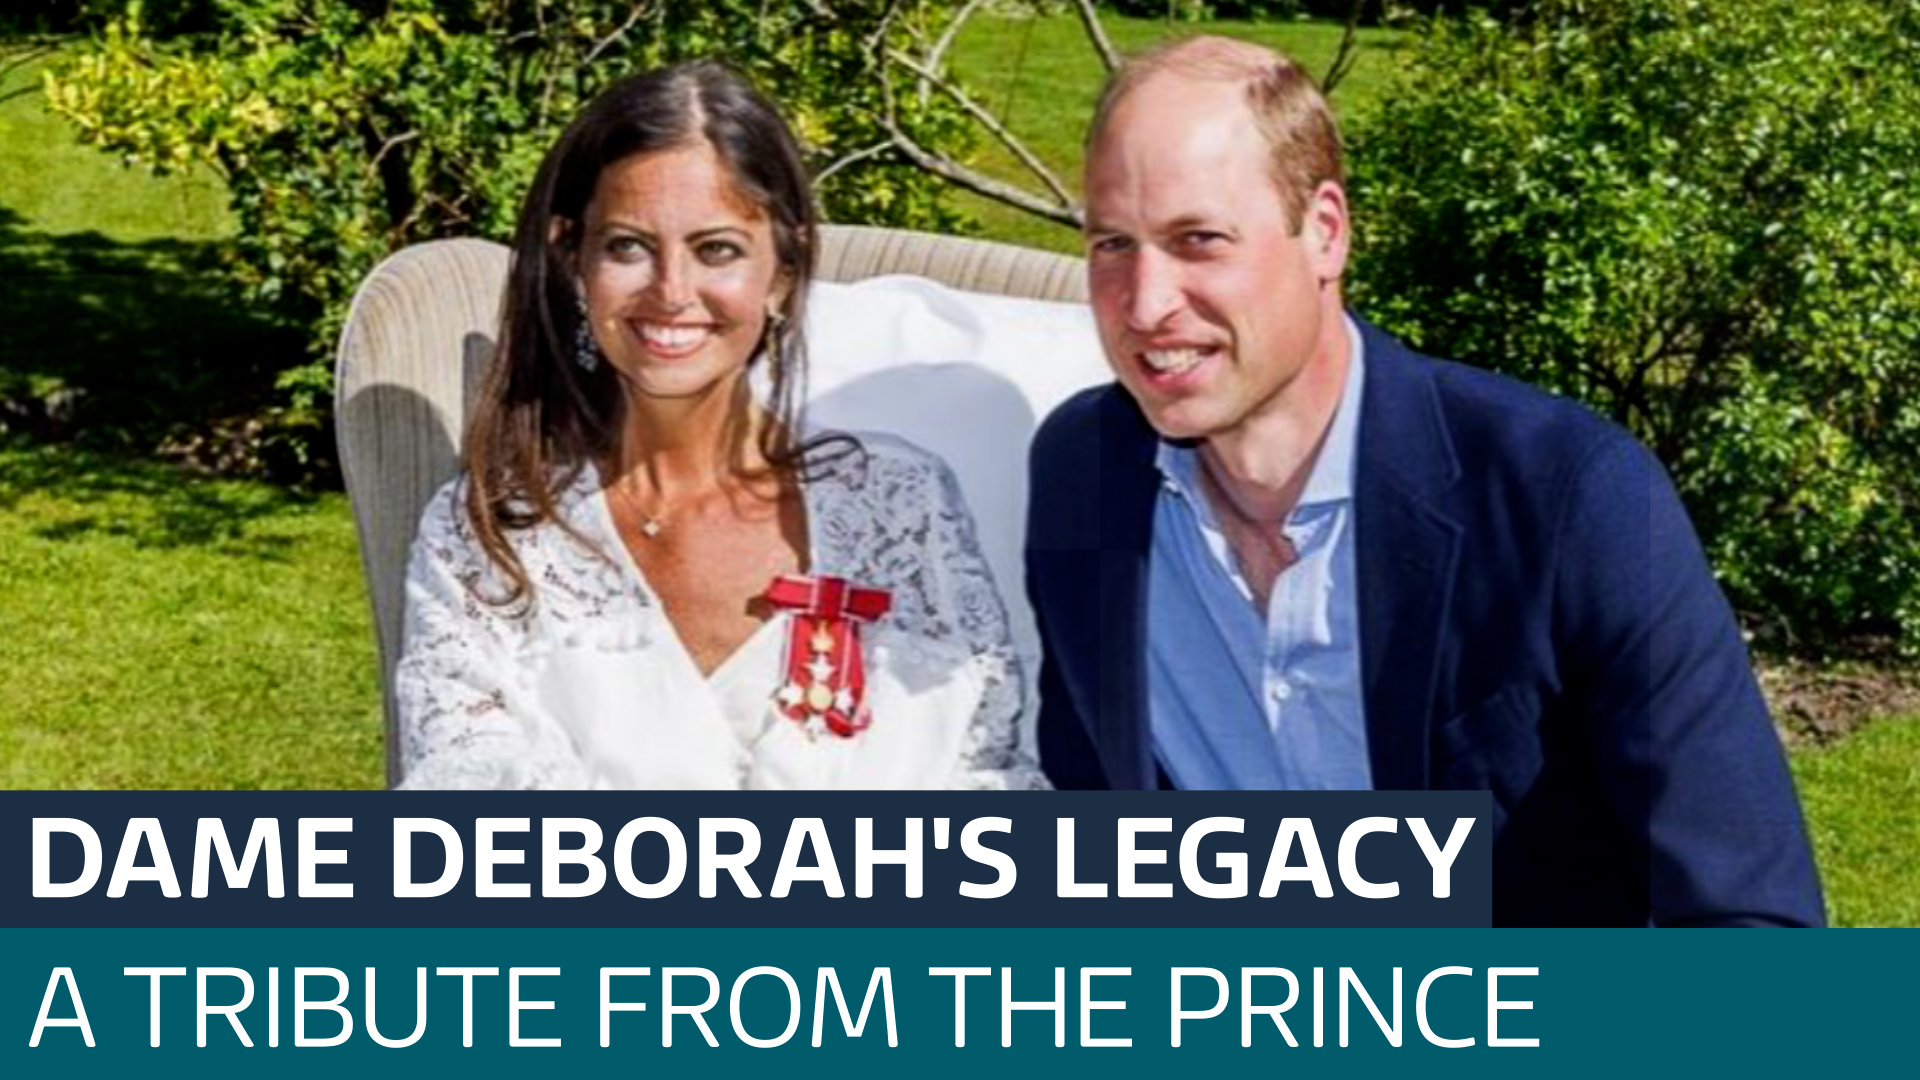 Prince William Pays Tribute To Dame Deborah James And Her Bowelbabe Legacy Latest From ITV News